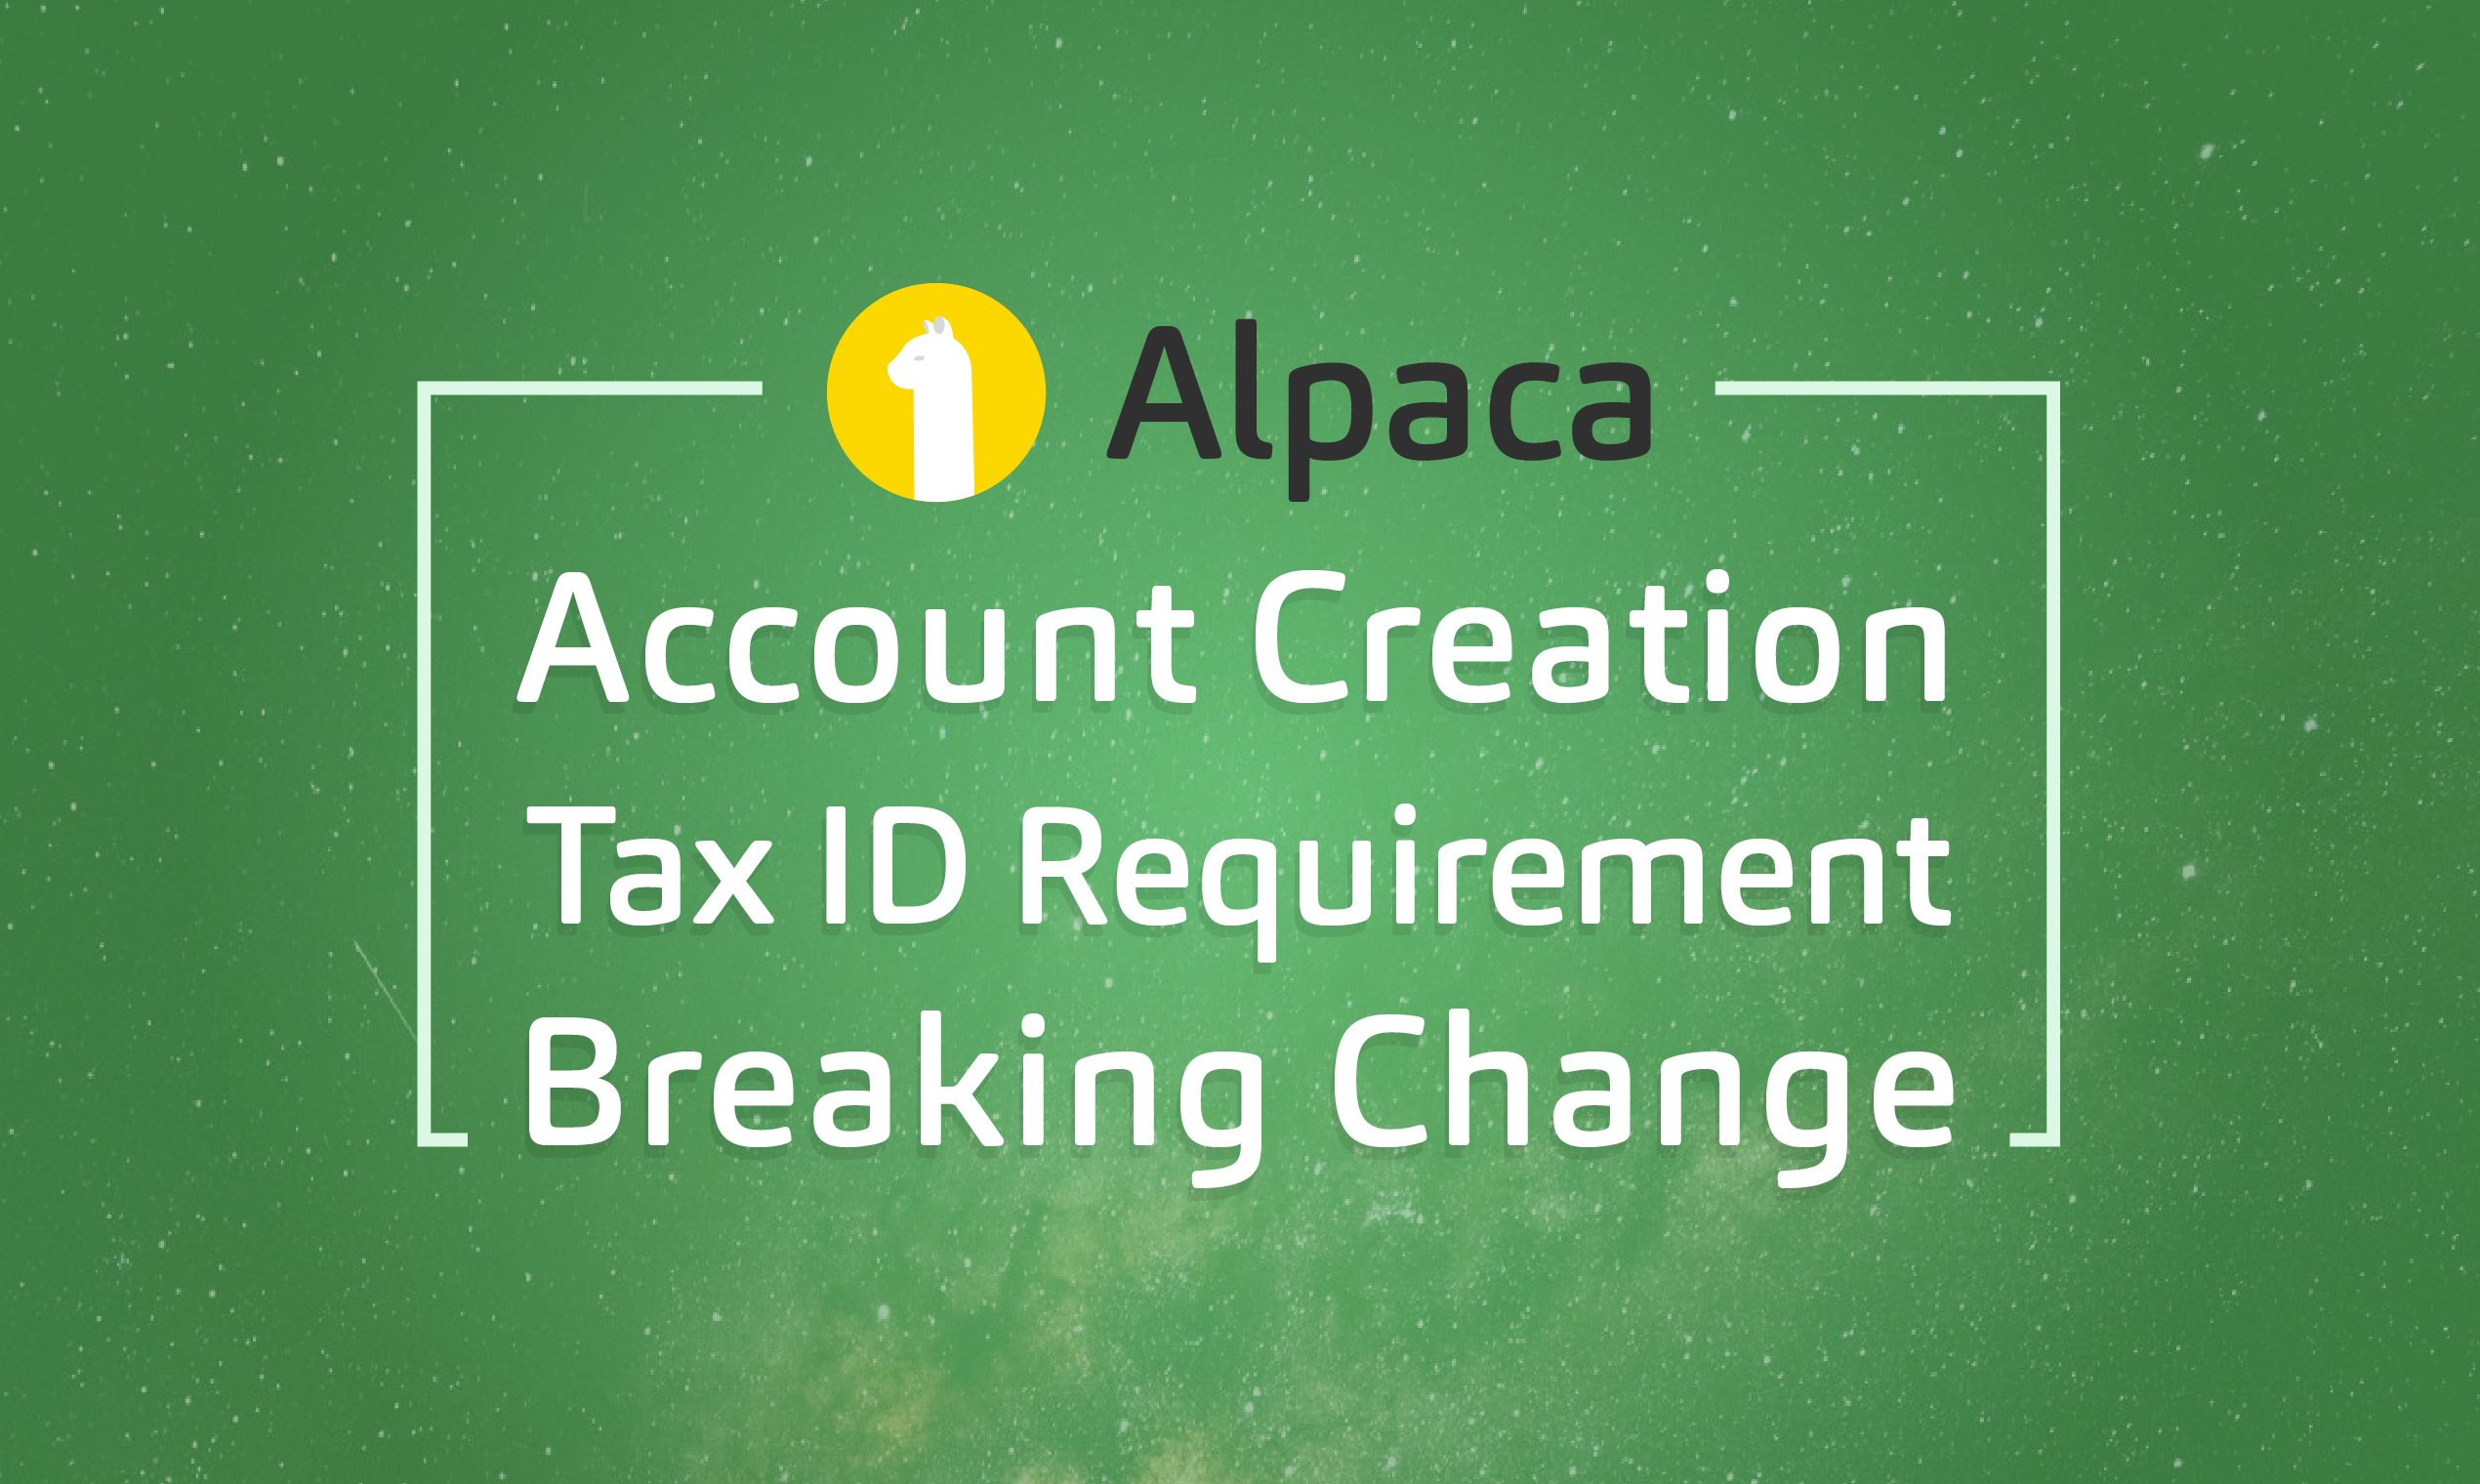 Breaking Change Notification for Account Creation Tax ID Requirement